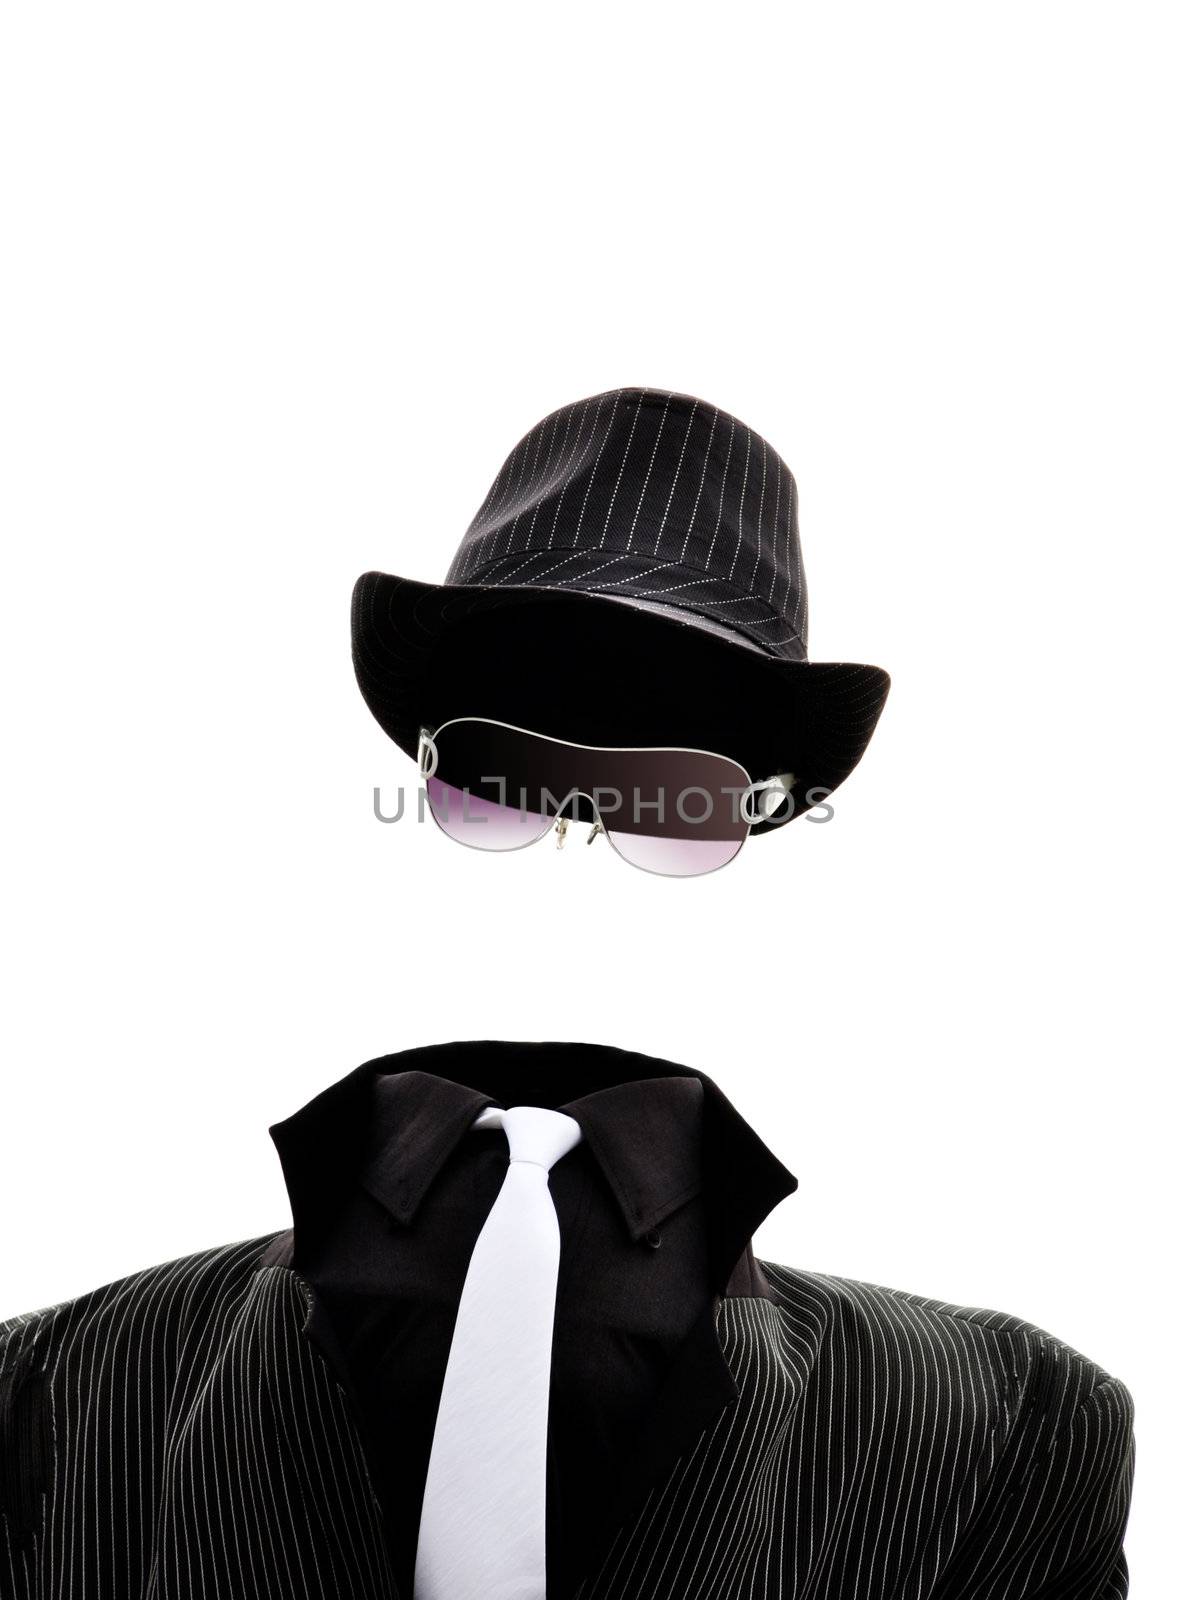 An invisible man isolated on white background